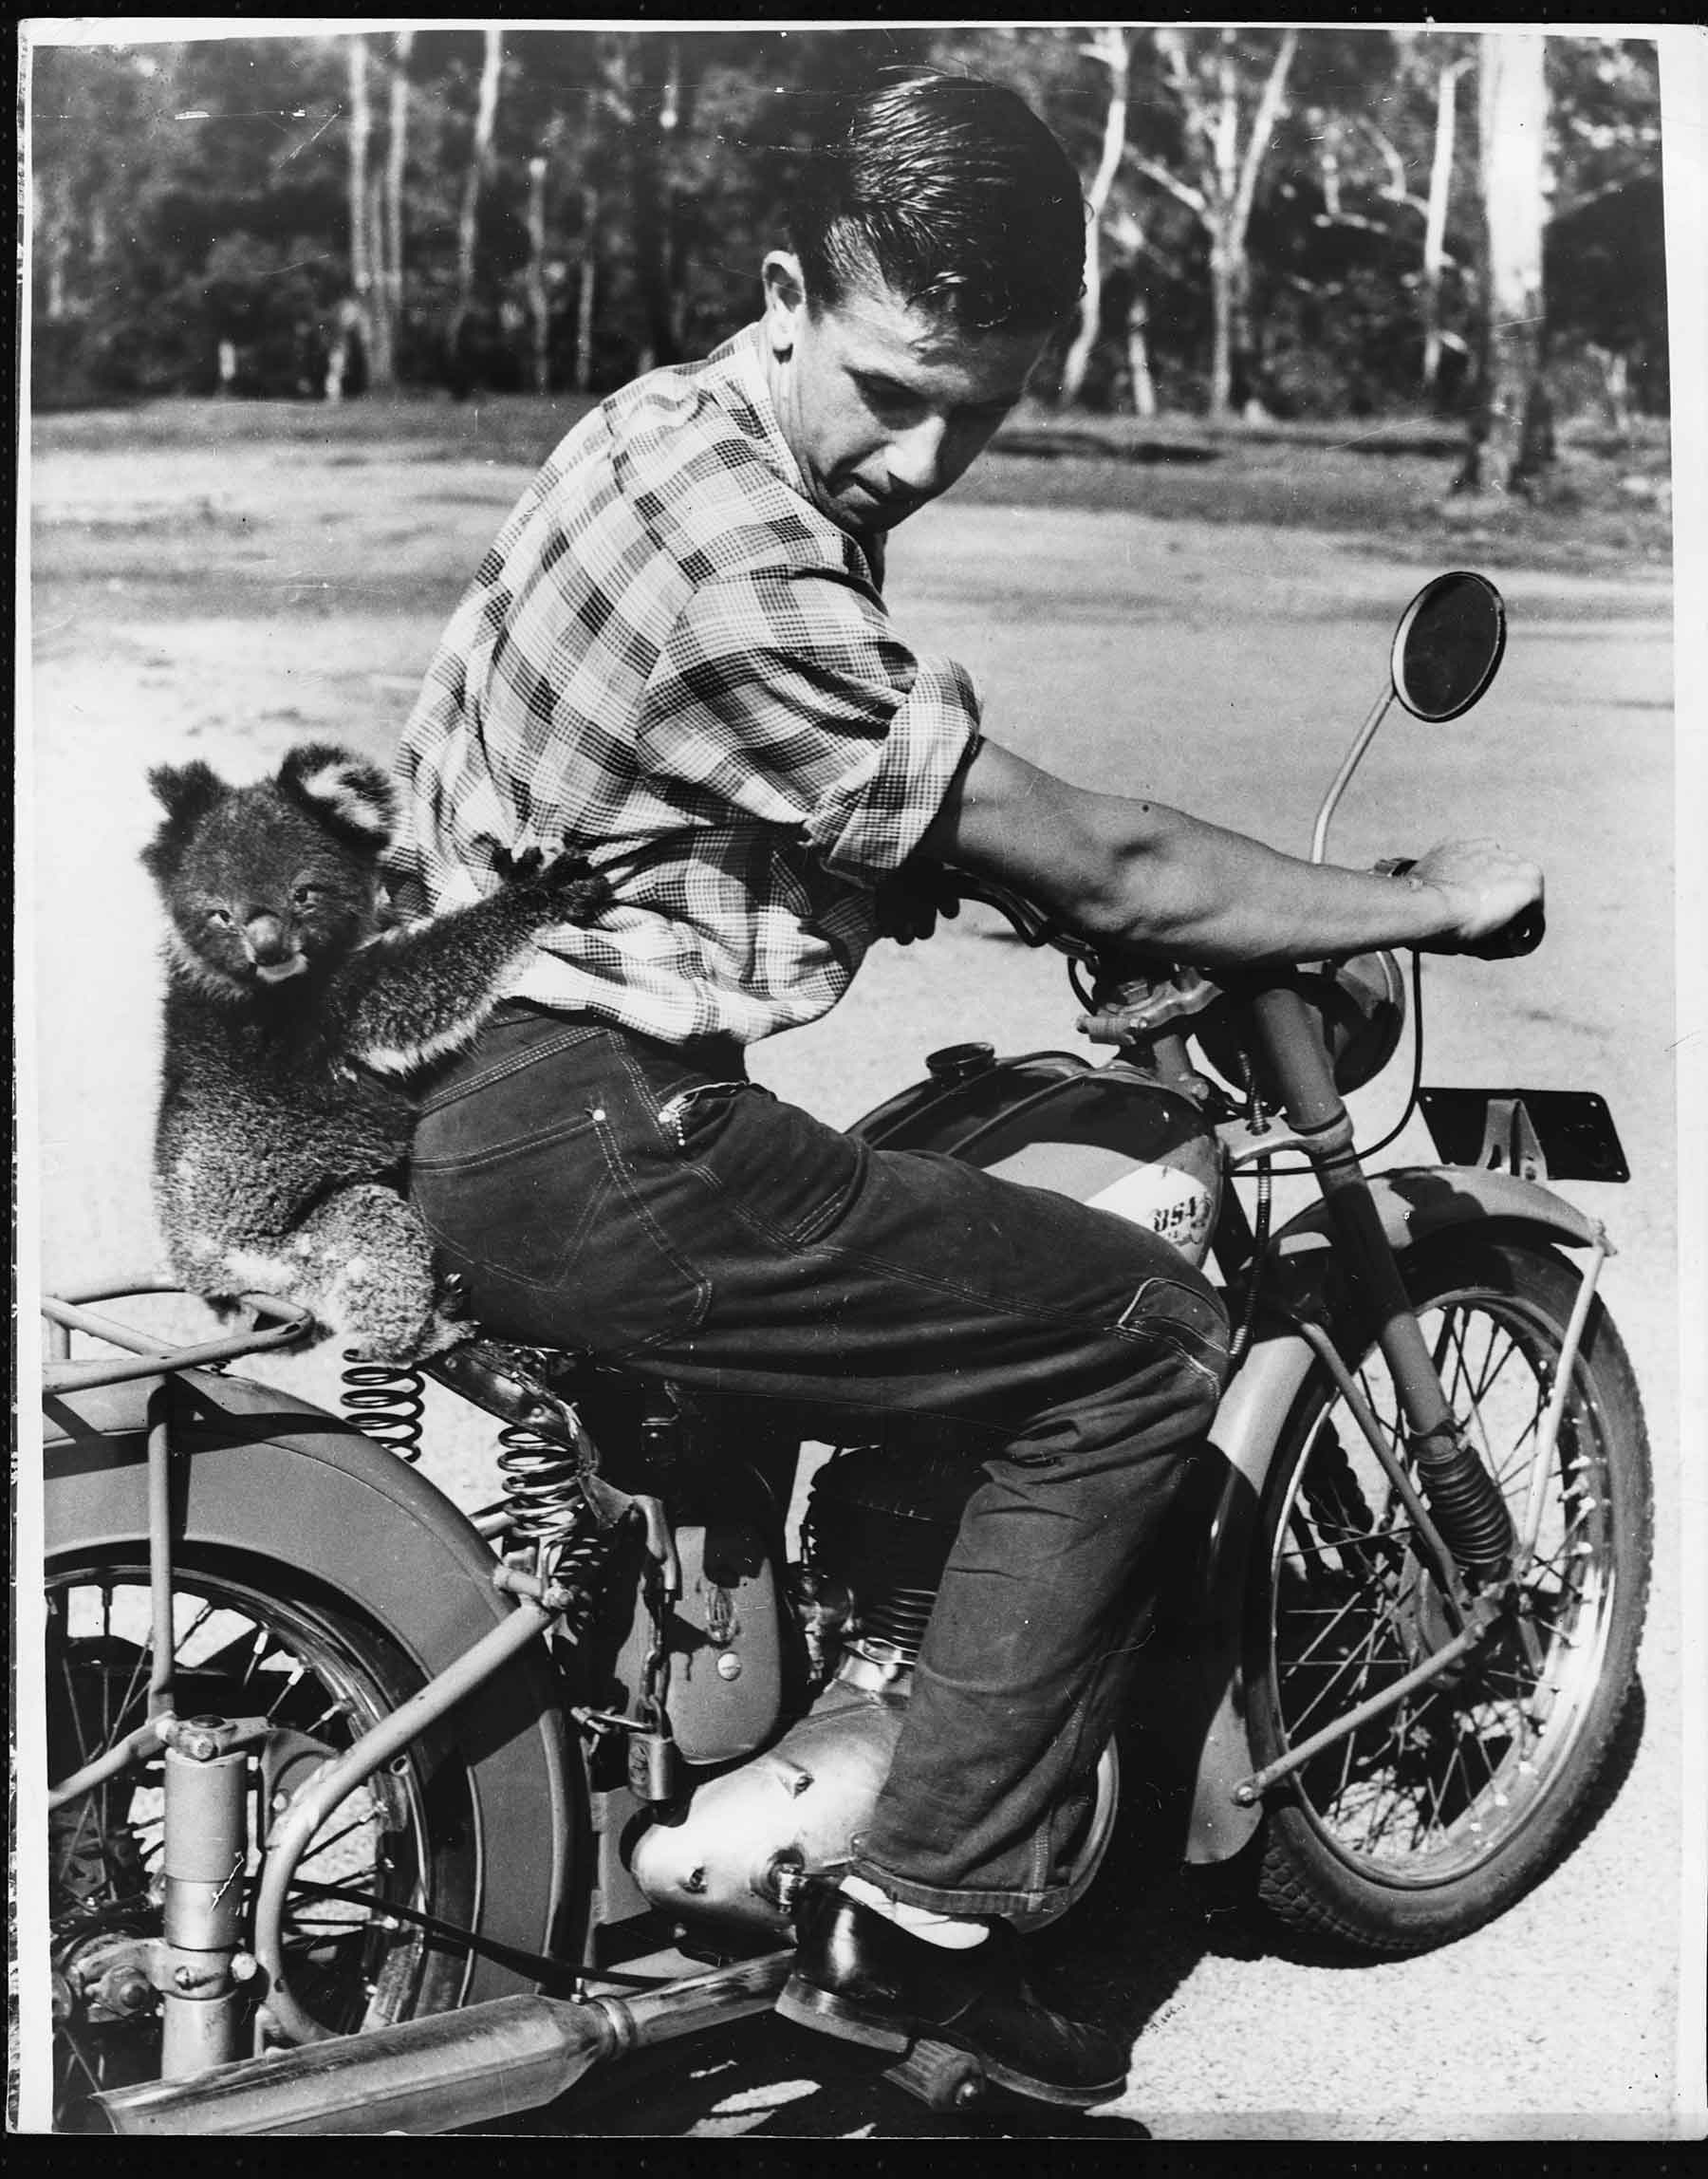 A pet koala, named Cuthbert, loves riding on his owner Ian’s BSA in this photo from Australia in 1960.